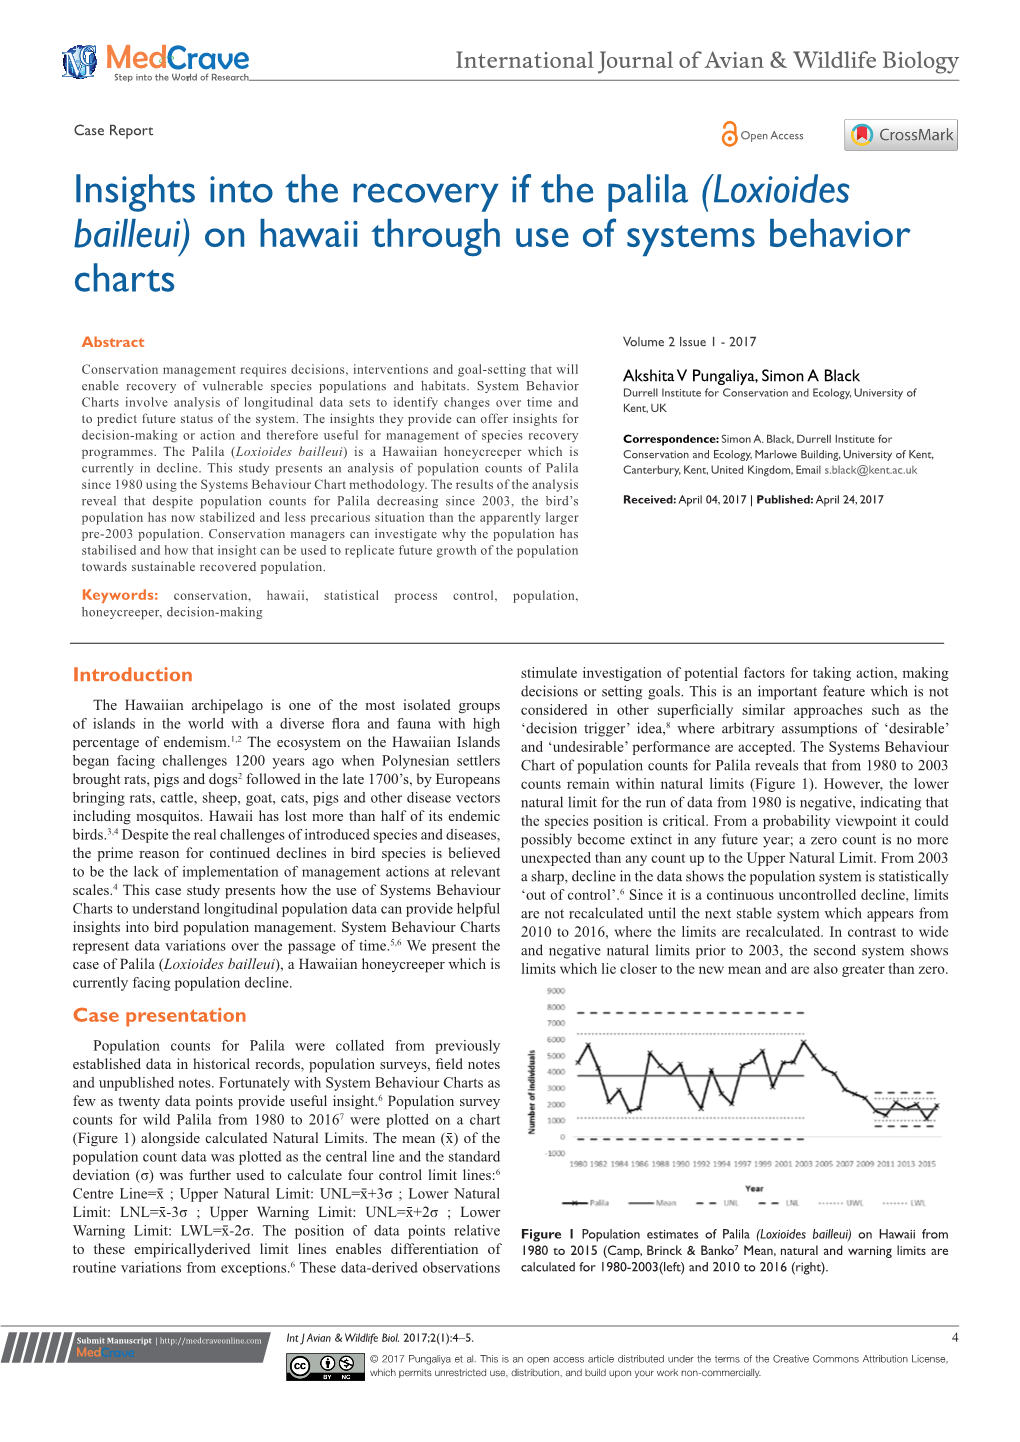 Loxioides Bailleui) on Hawaii Through Use of Systems Behavior Charts